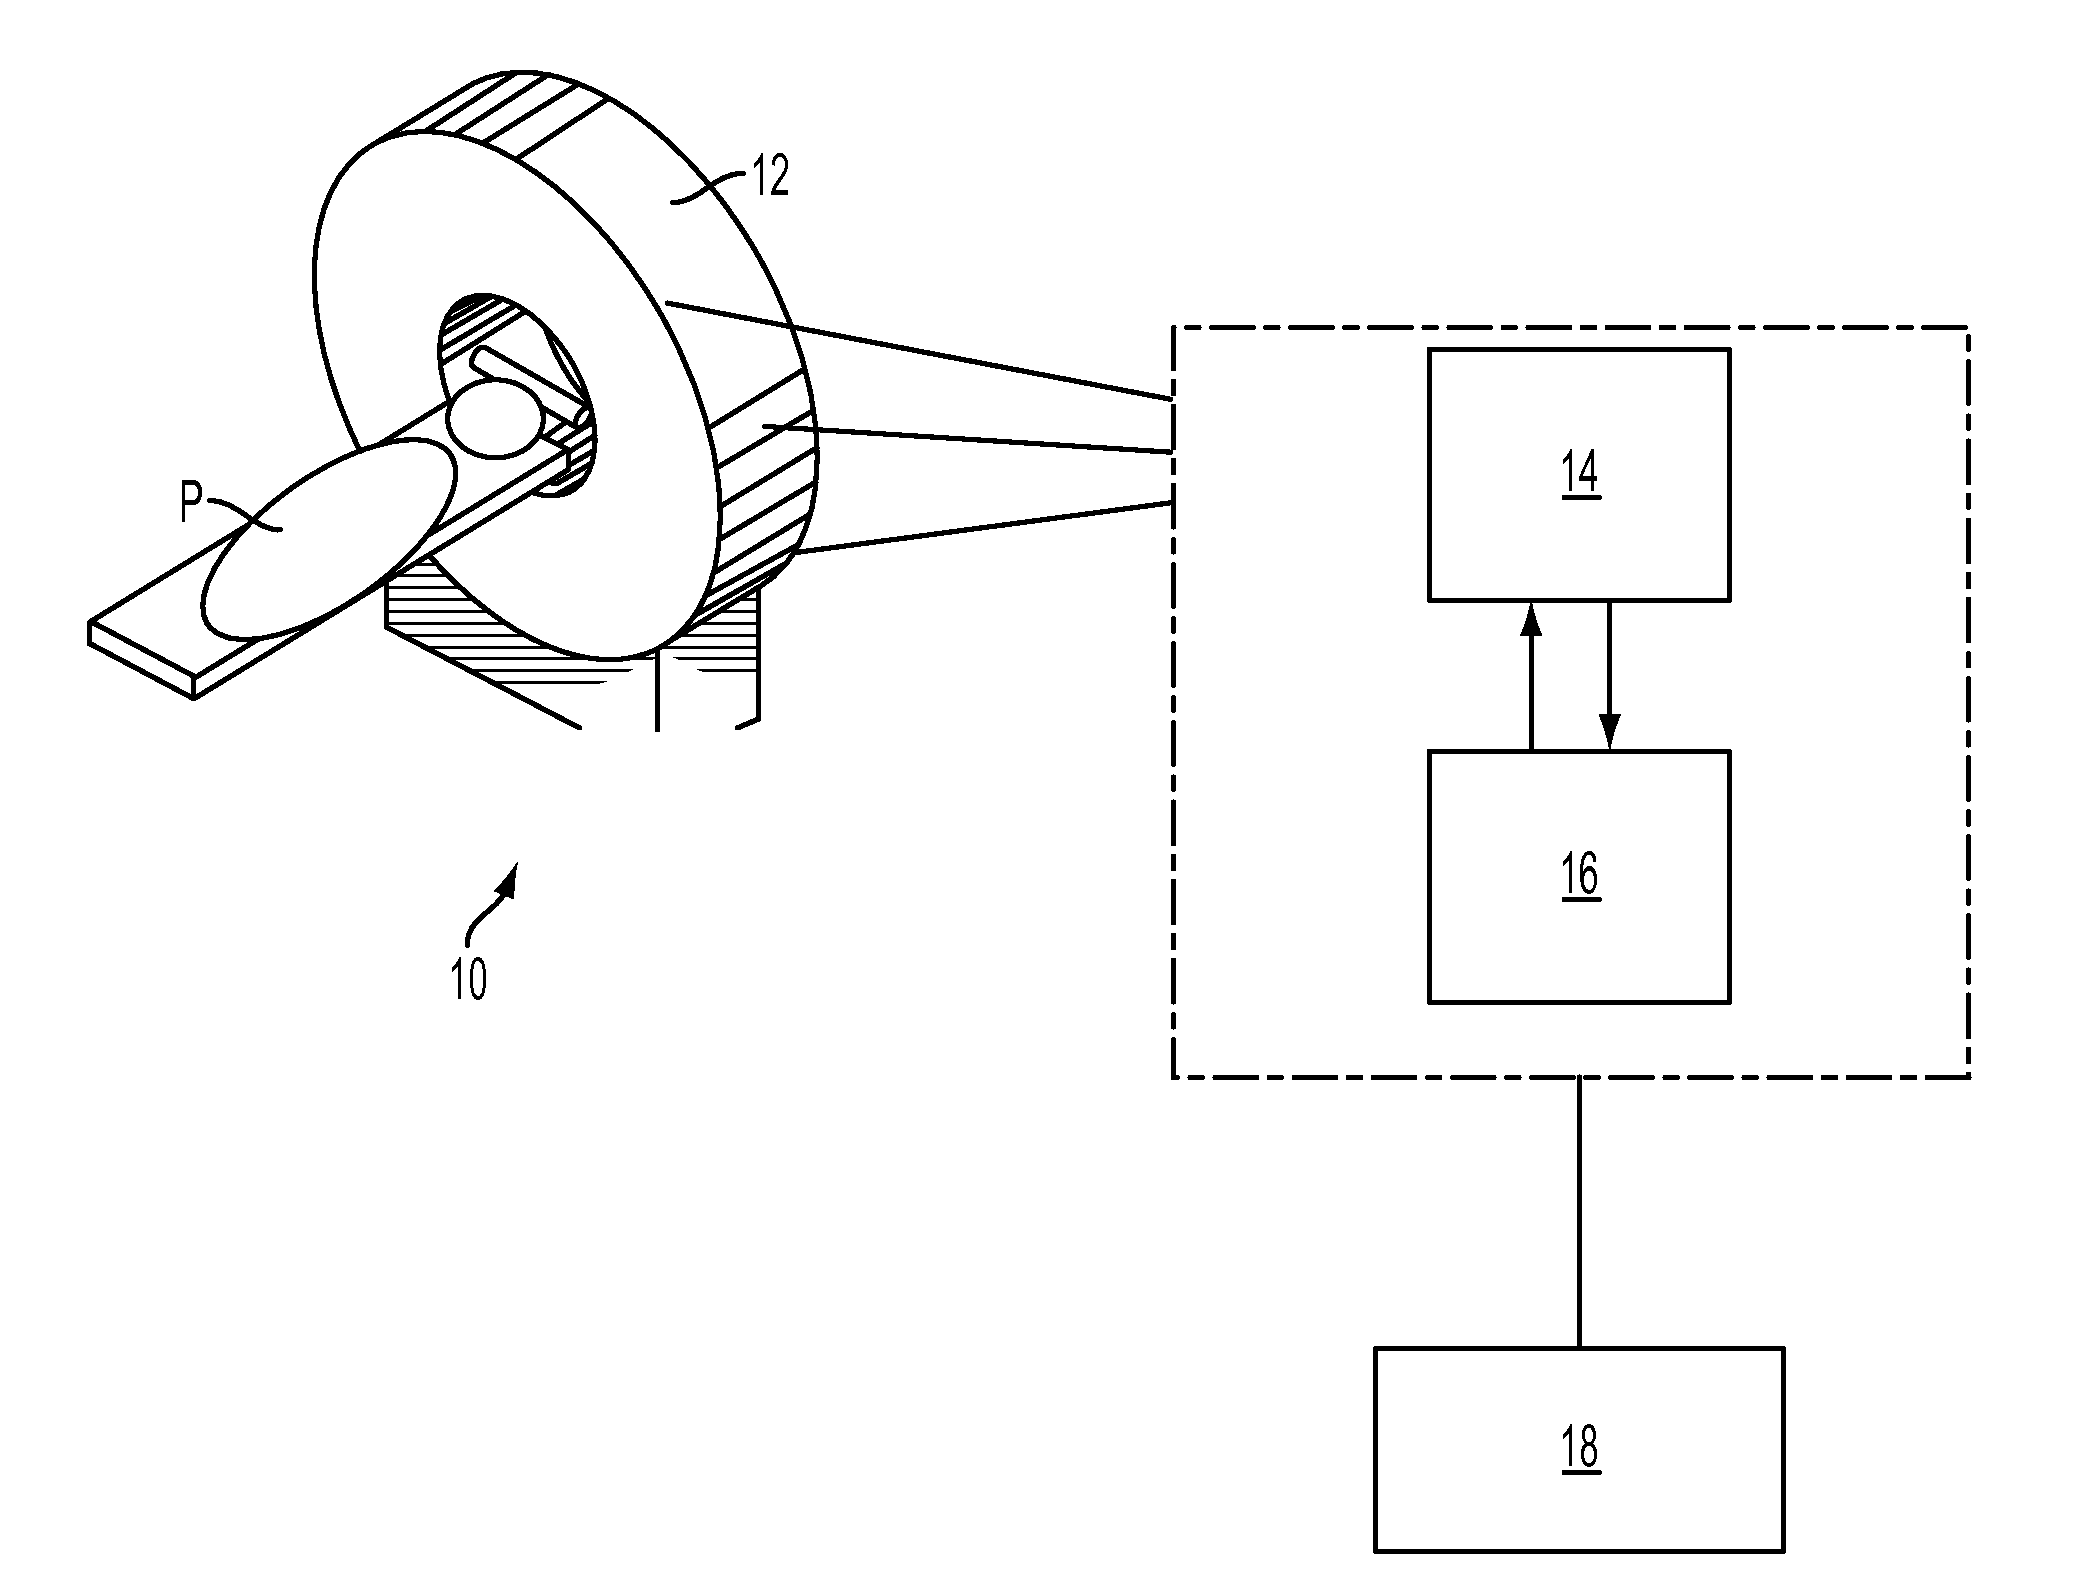 Depth-of-Interaction in an Imaging Device